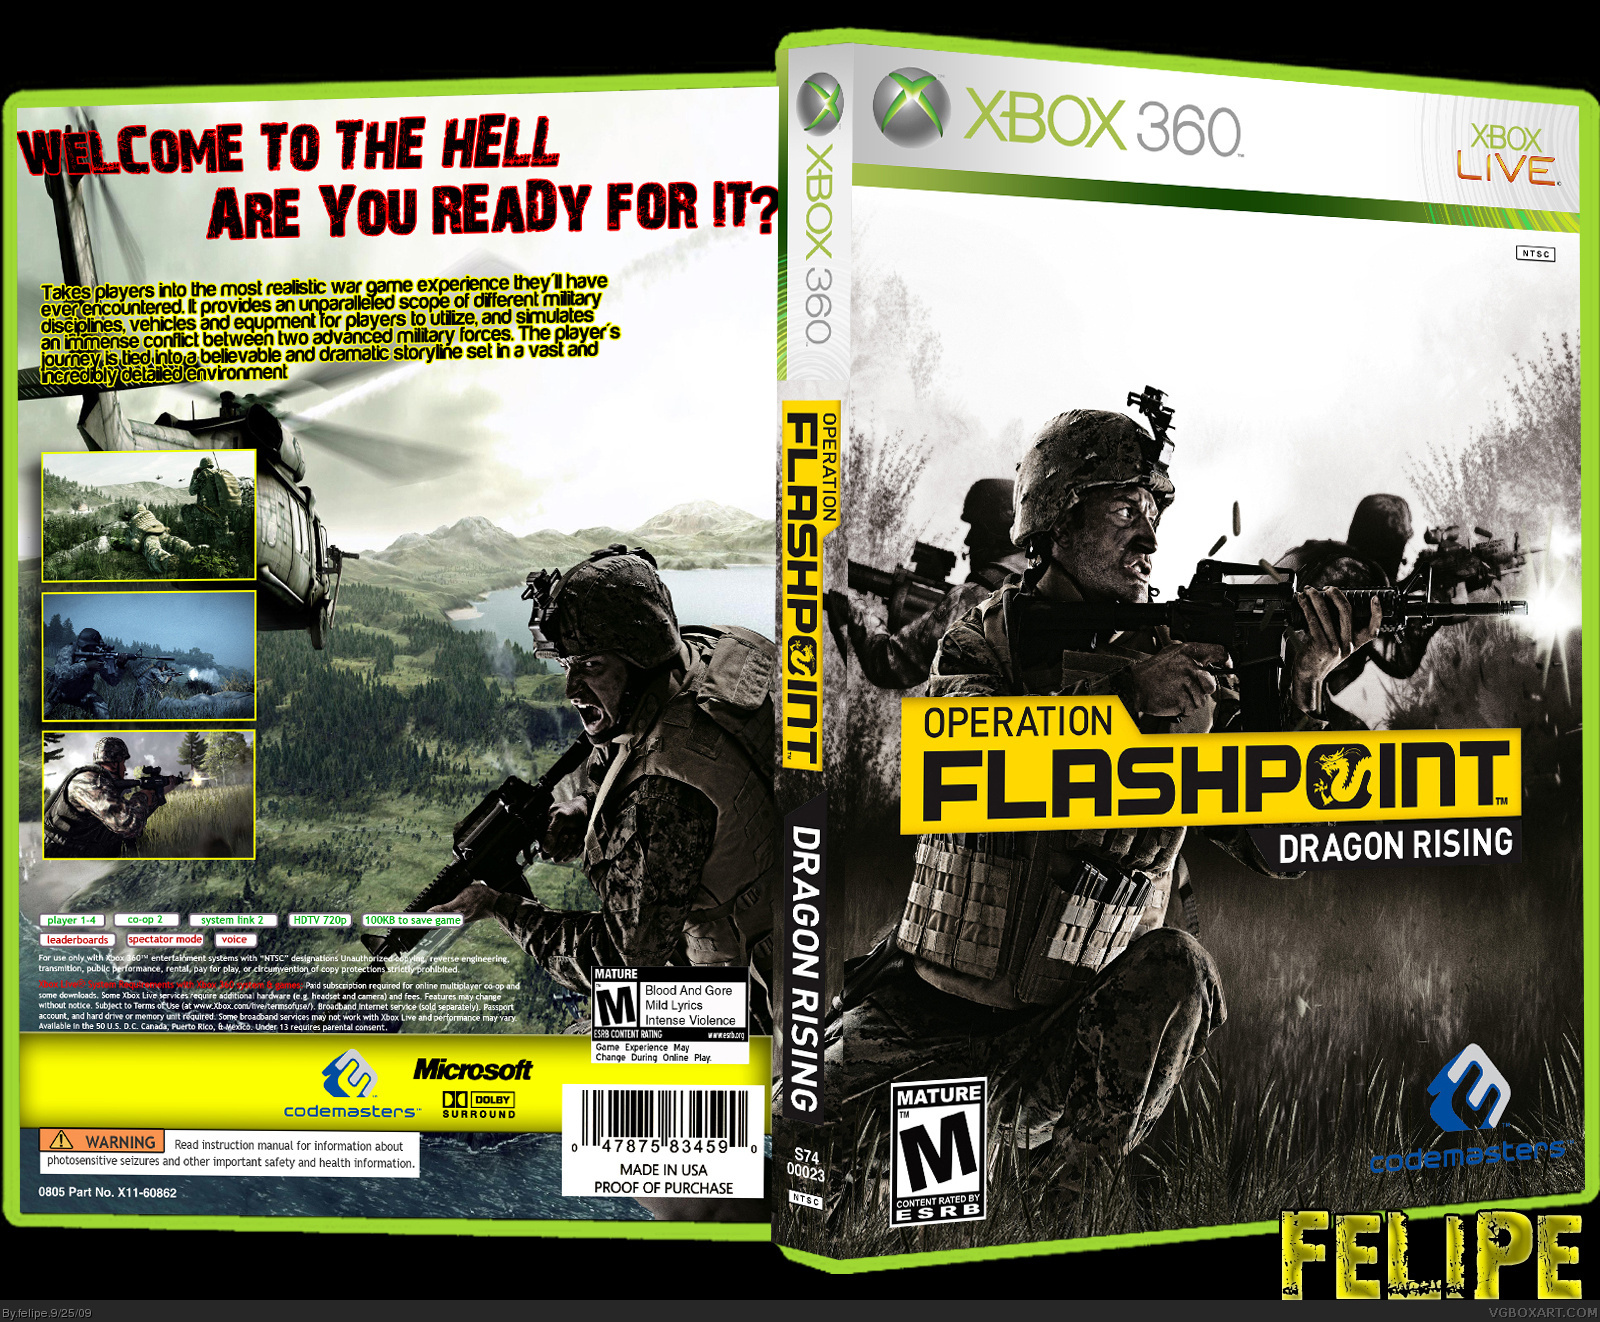 Operation Flashpoint: Dragon Rising box cover